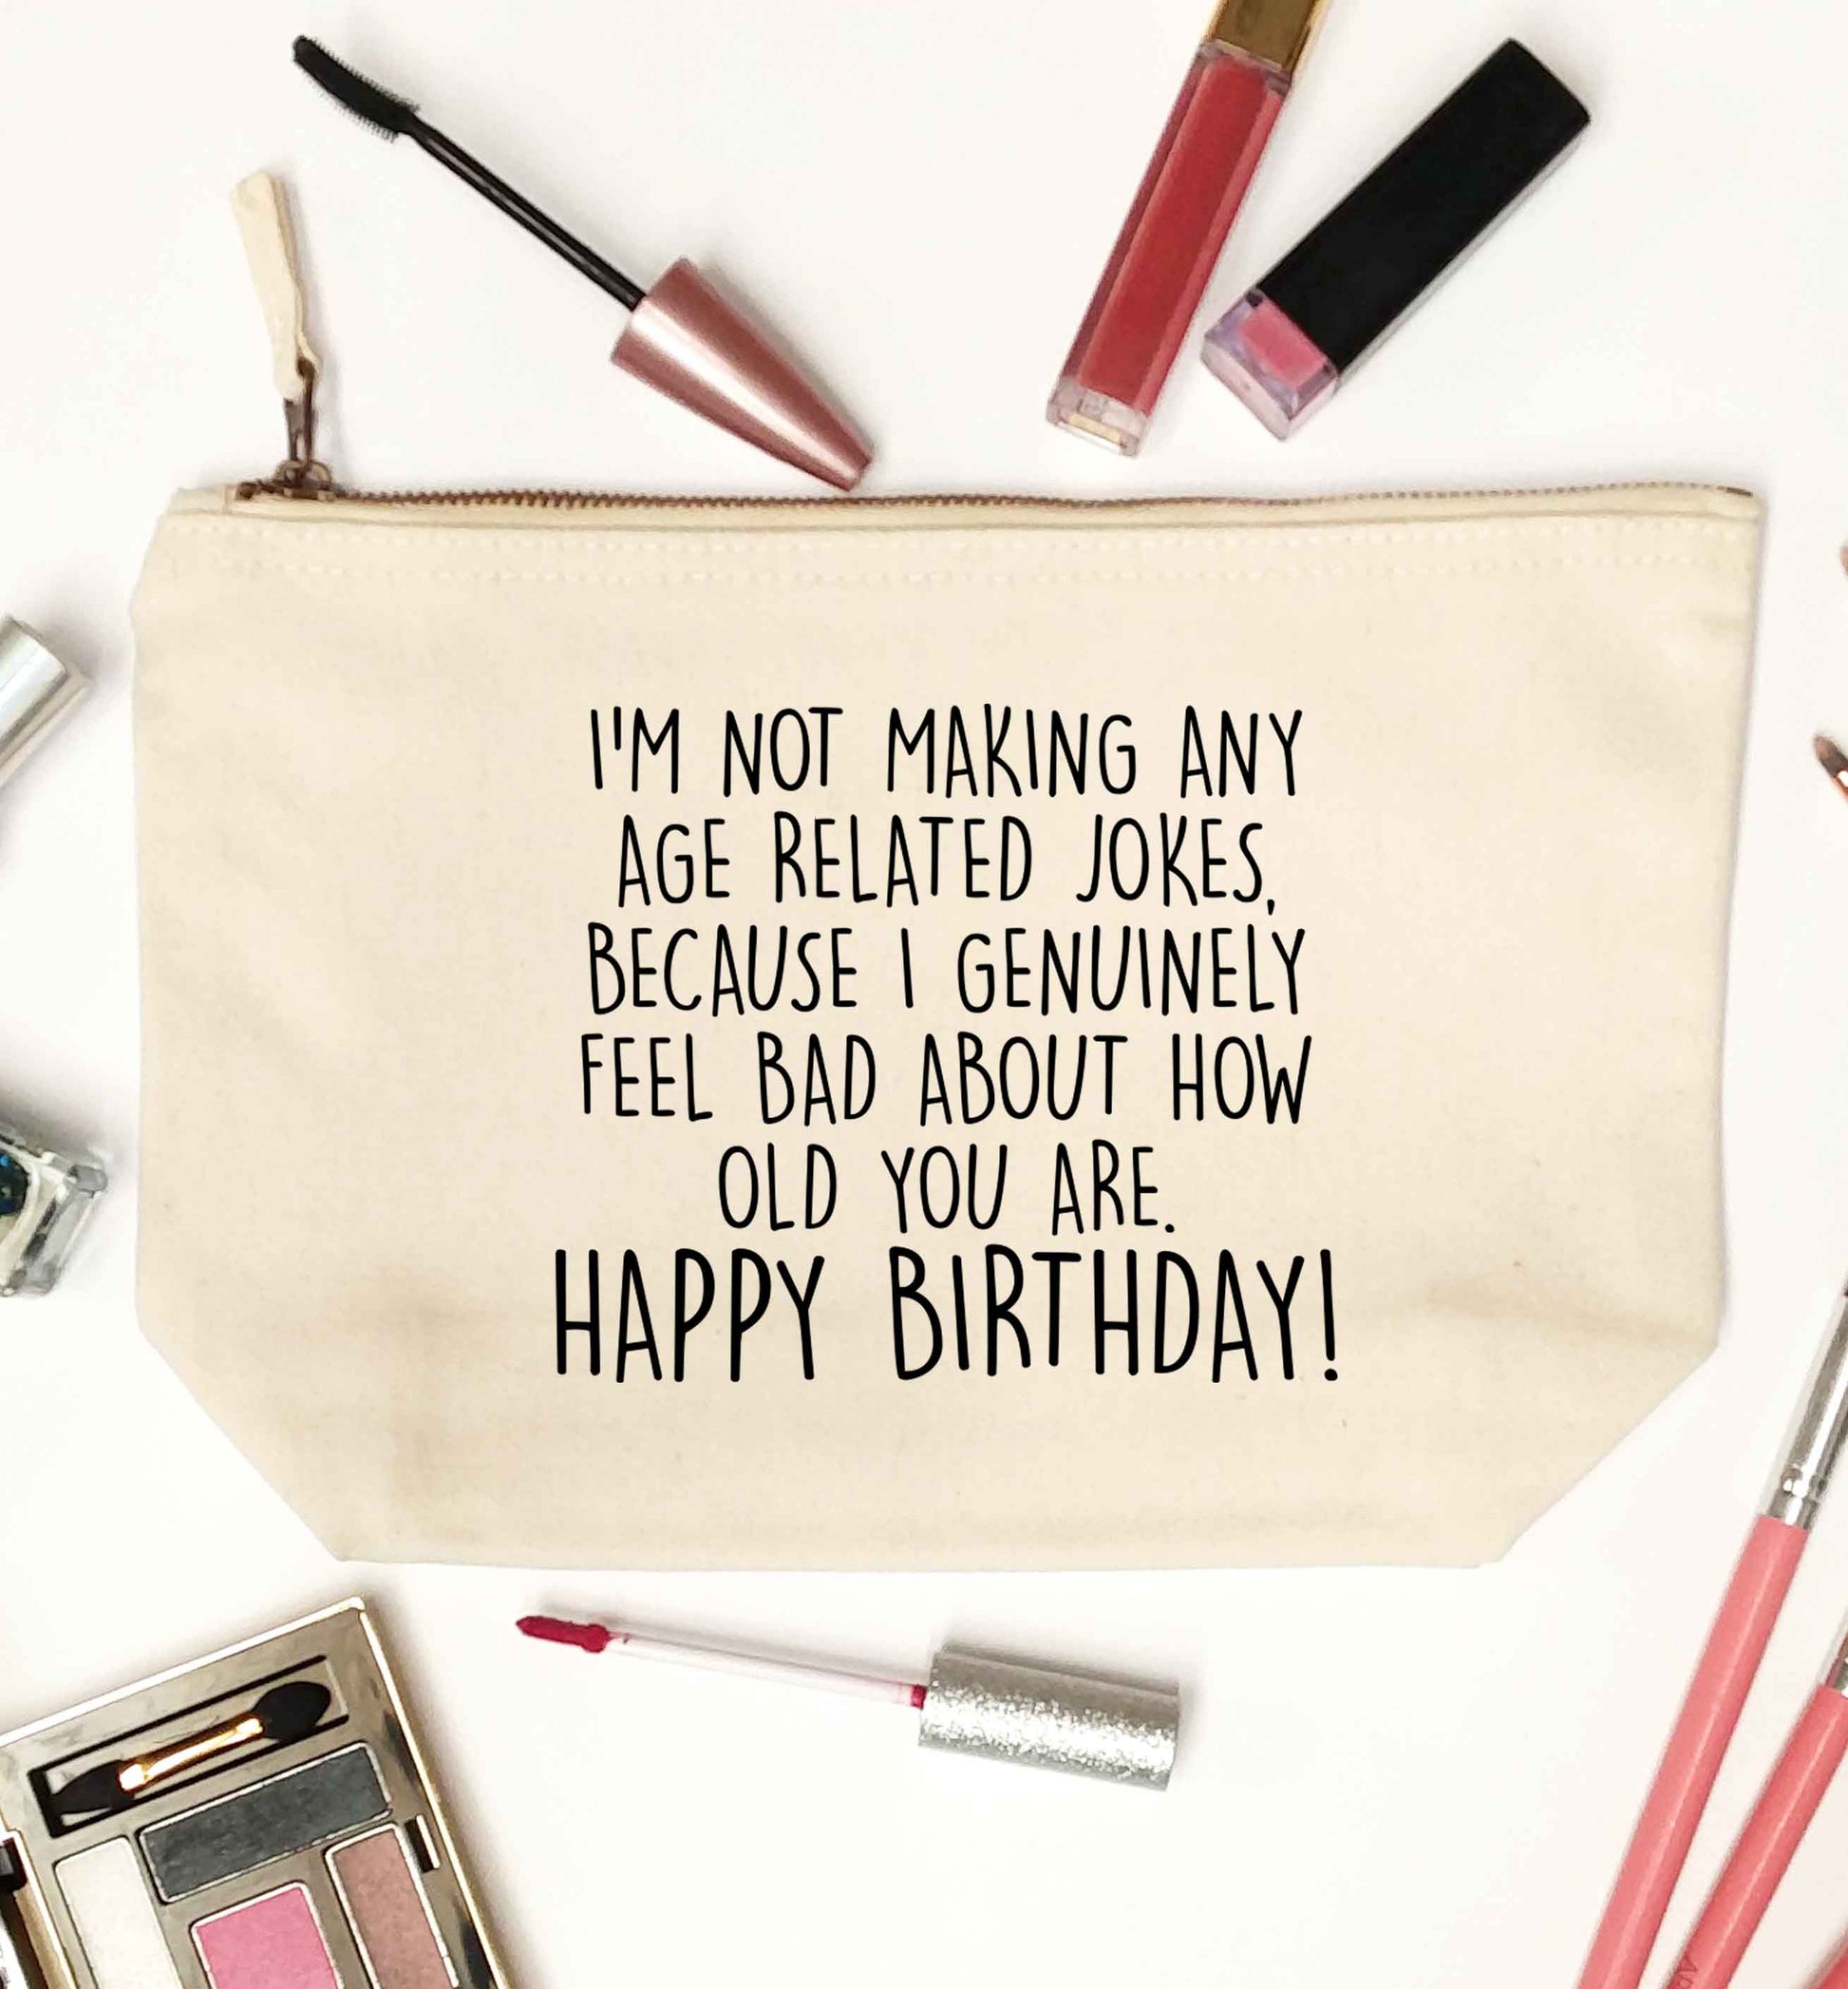 I'm not making any age related jokes because I genuinely feel bad for how old you are natural makeup bag